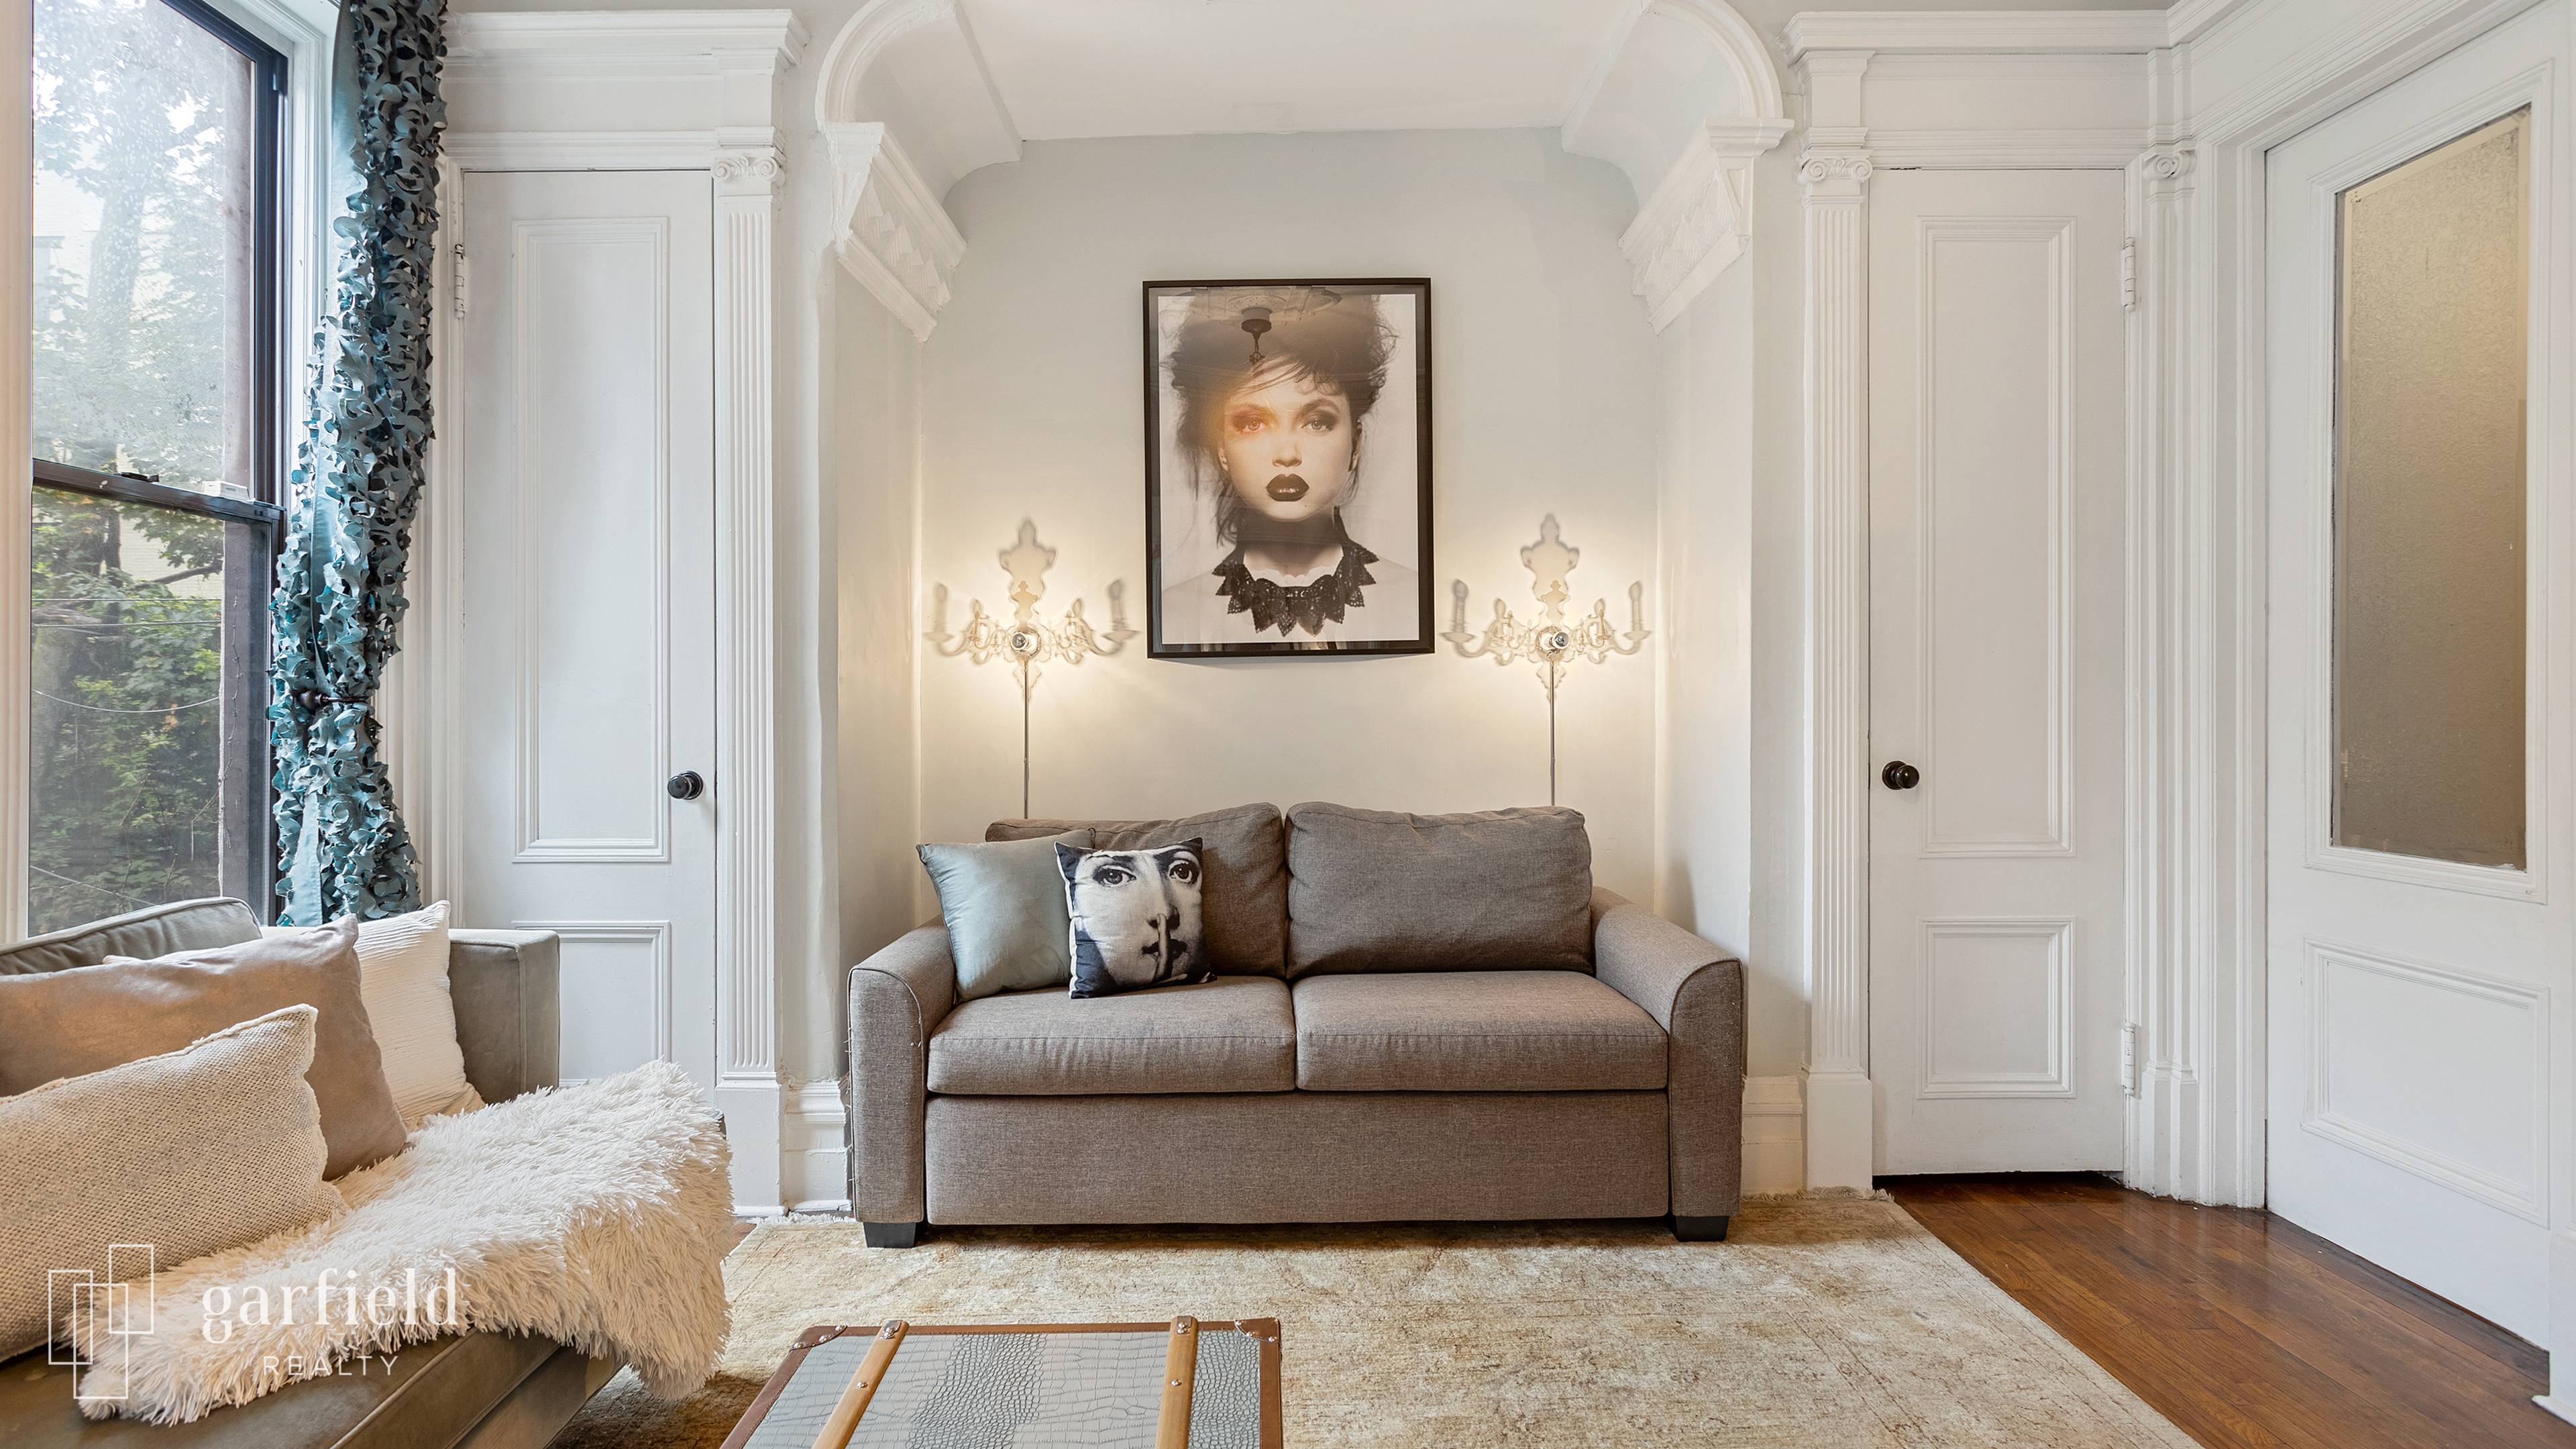 PRICE IMPROVEMENT ! Gracious and inviting from top to bottom, this handsome Neo Grec brownstone has been lovingly renovated and restoredan effortless marriage of old world elegance paired with chic, ...